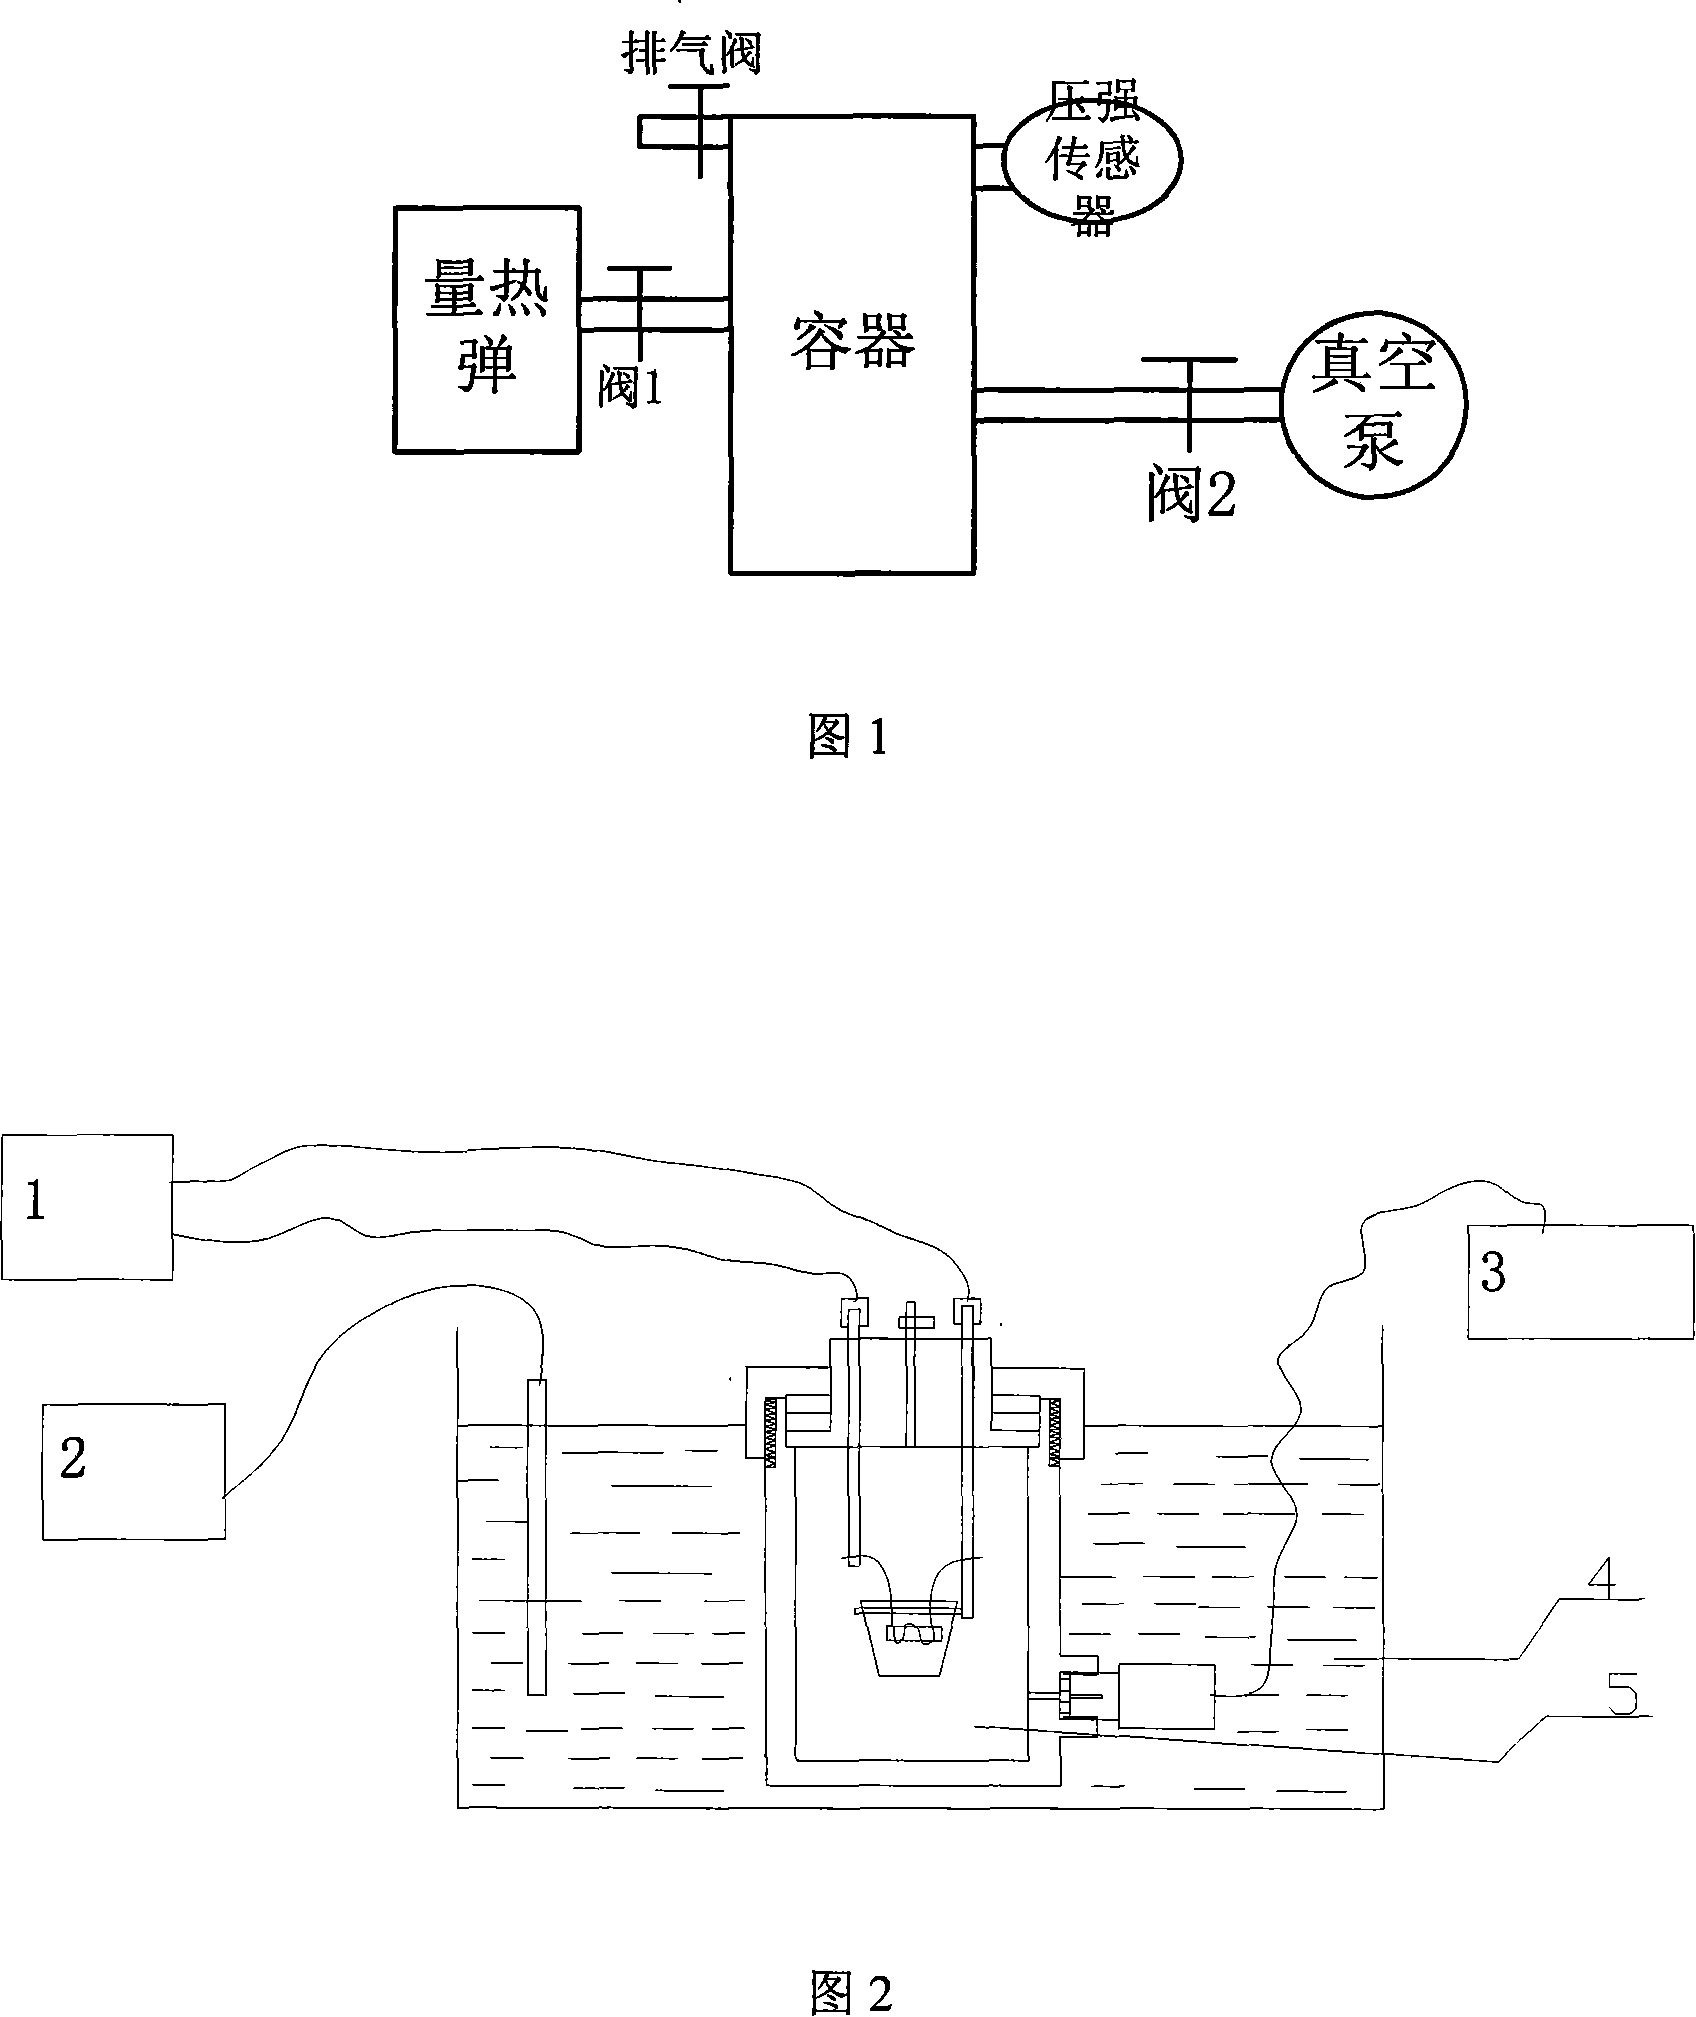 Propellant burning gas mole number test method and its device